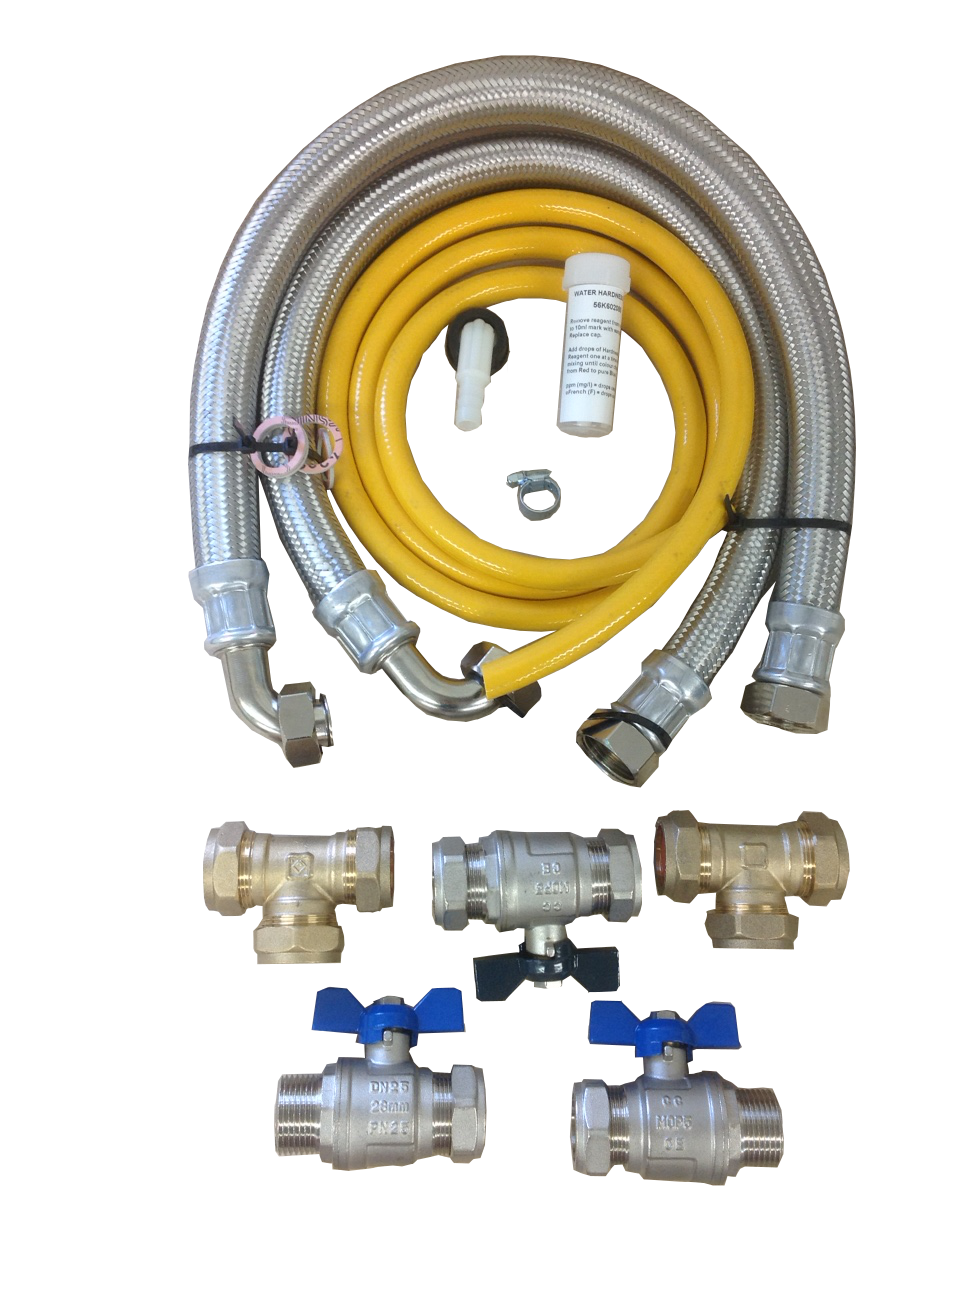 28mm (1") Full Bore Installation Kit 1000mm Hoses - WRAS APPROVED